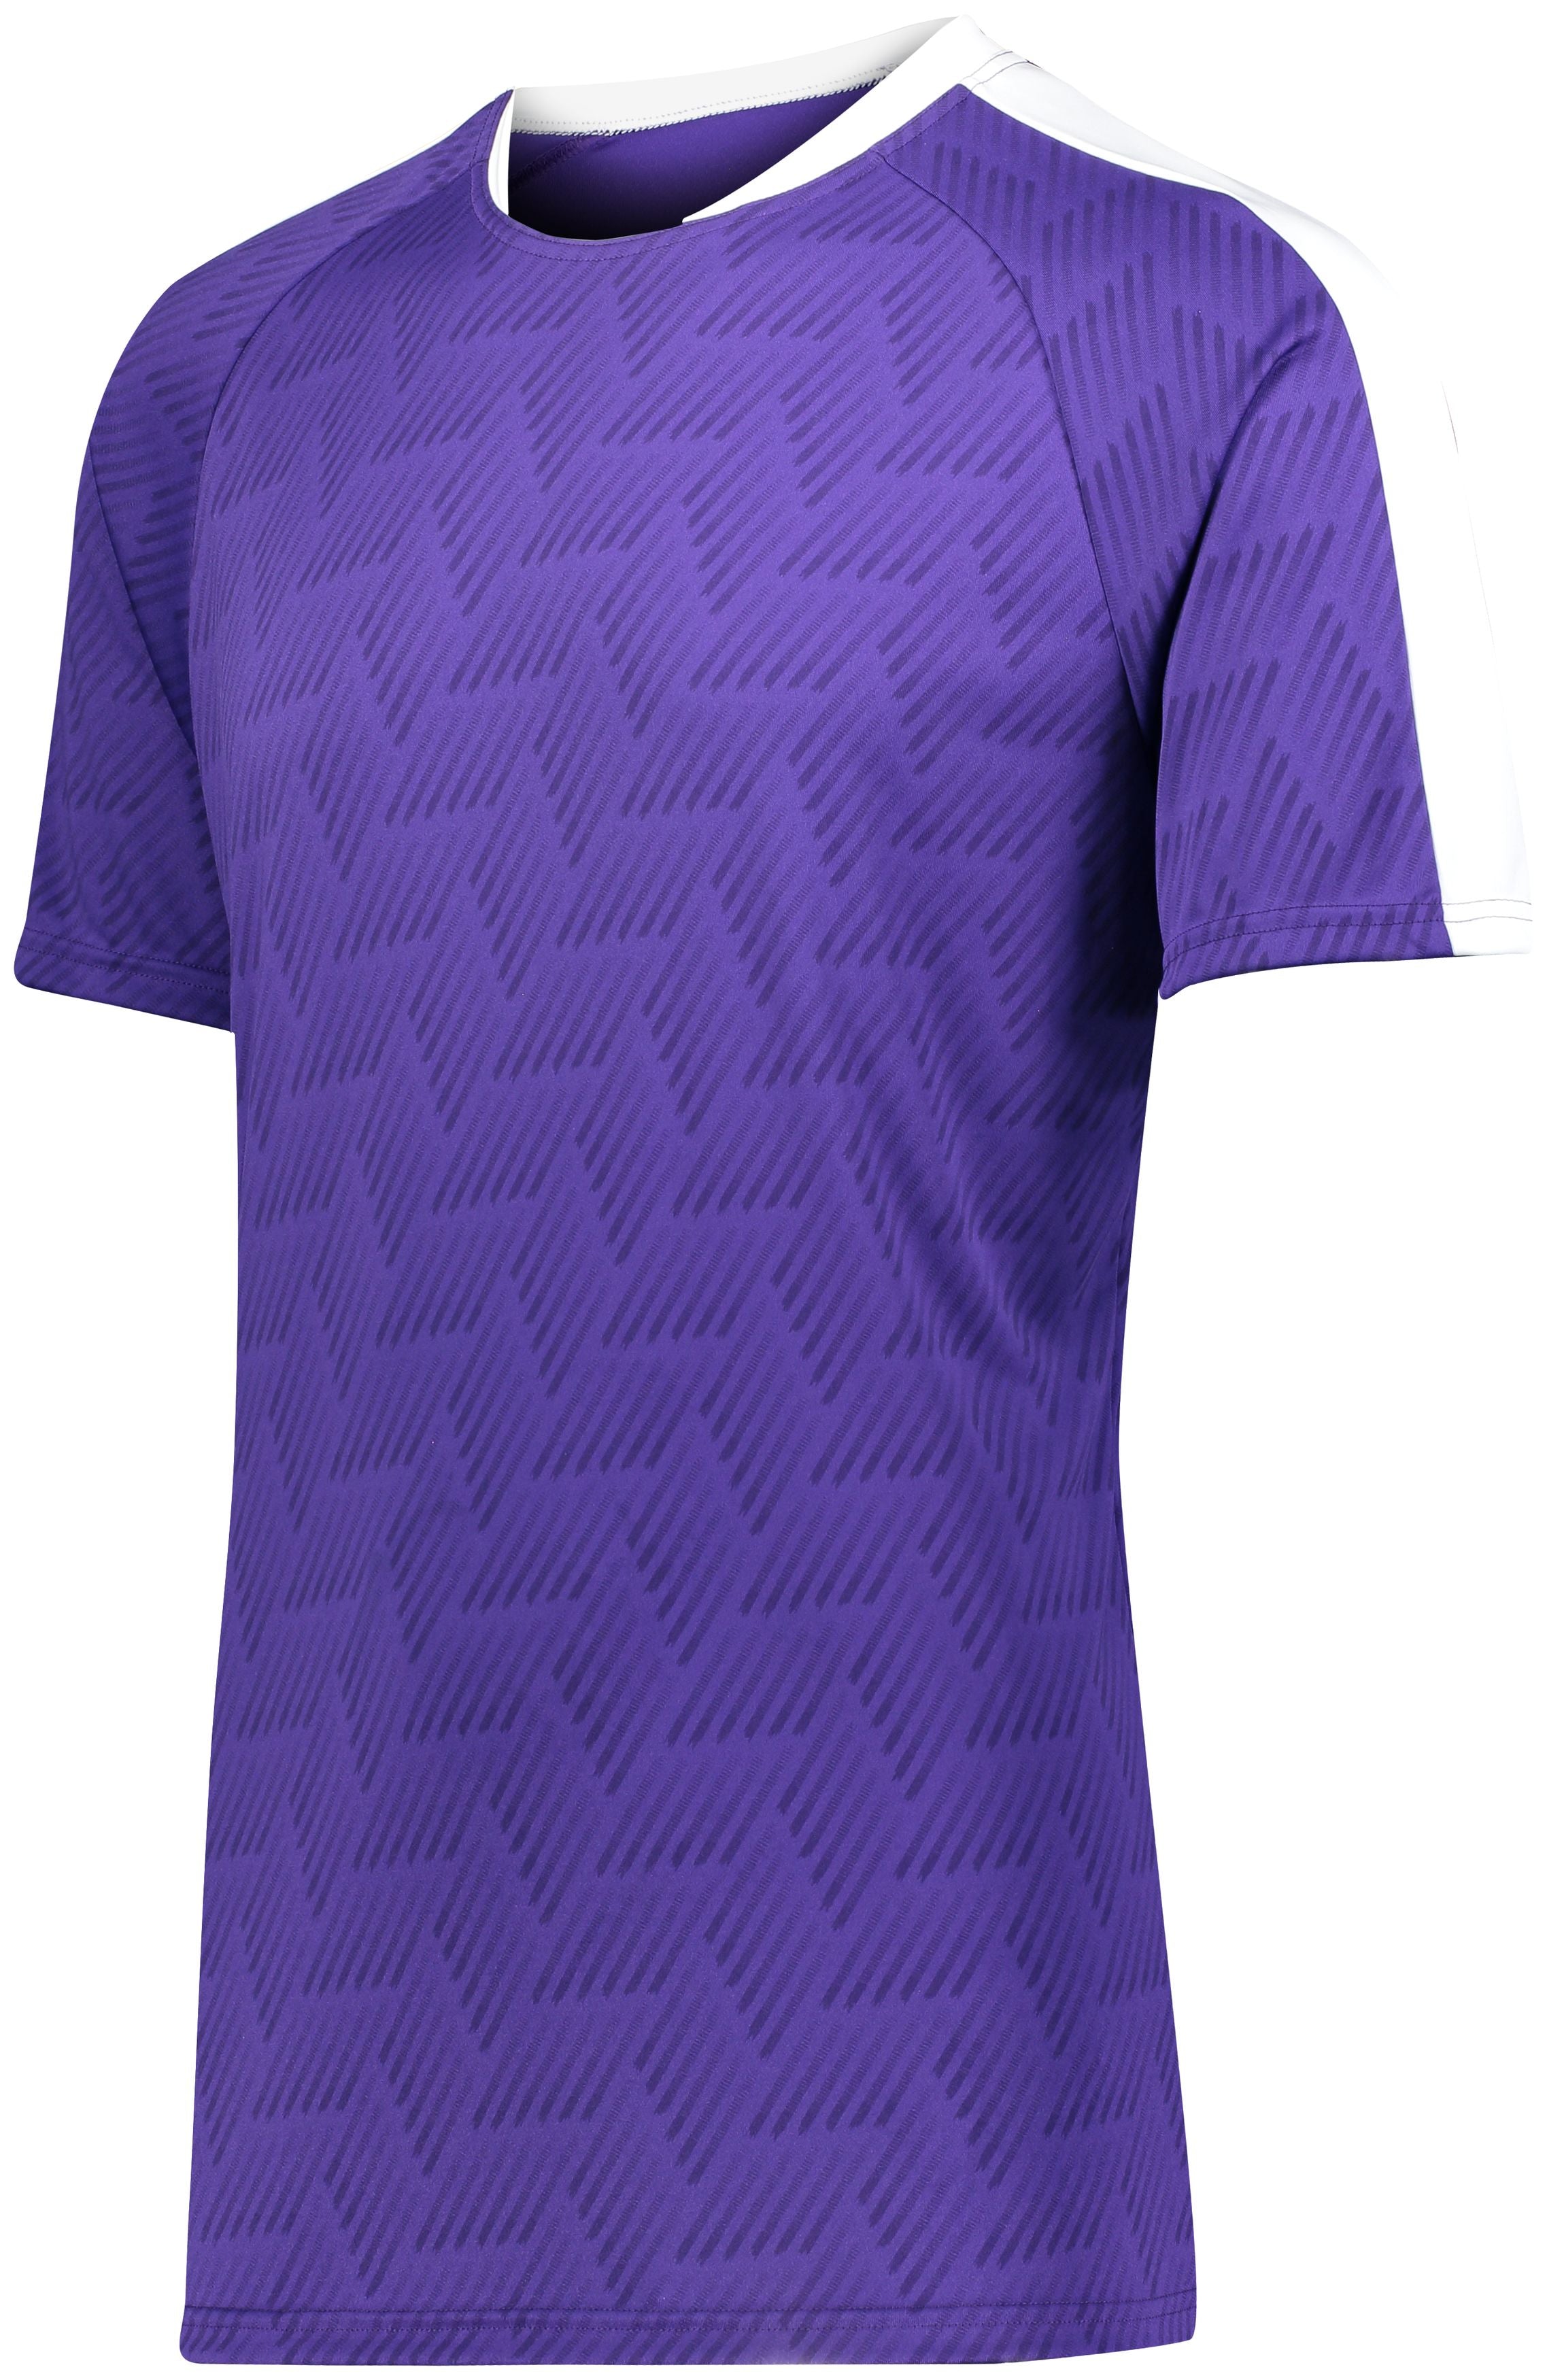 High 5 Youth Hypervolt Jersey in Purple Print/White  -Part of the Youth, Youth-Jersey, High5-Products, Soccer, Shirts, All-Sports-1 product lines at KanaleyCreations.com